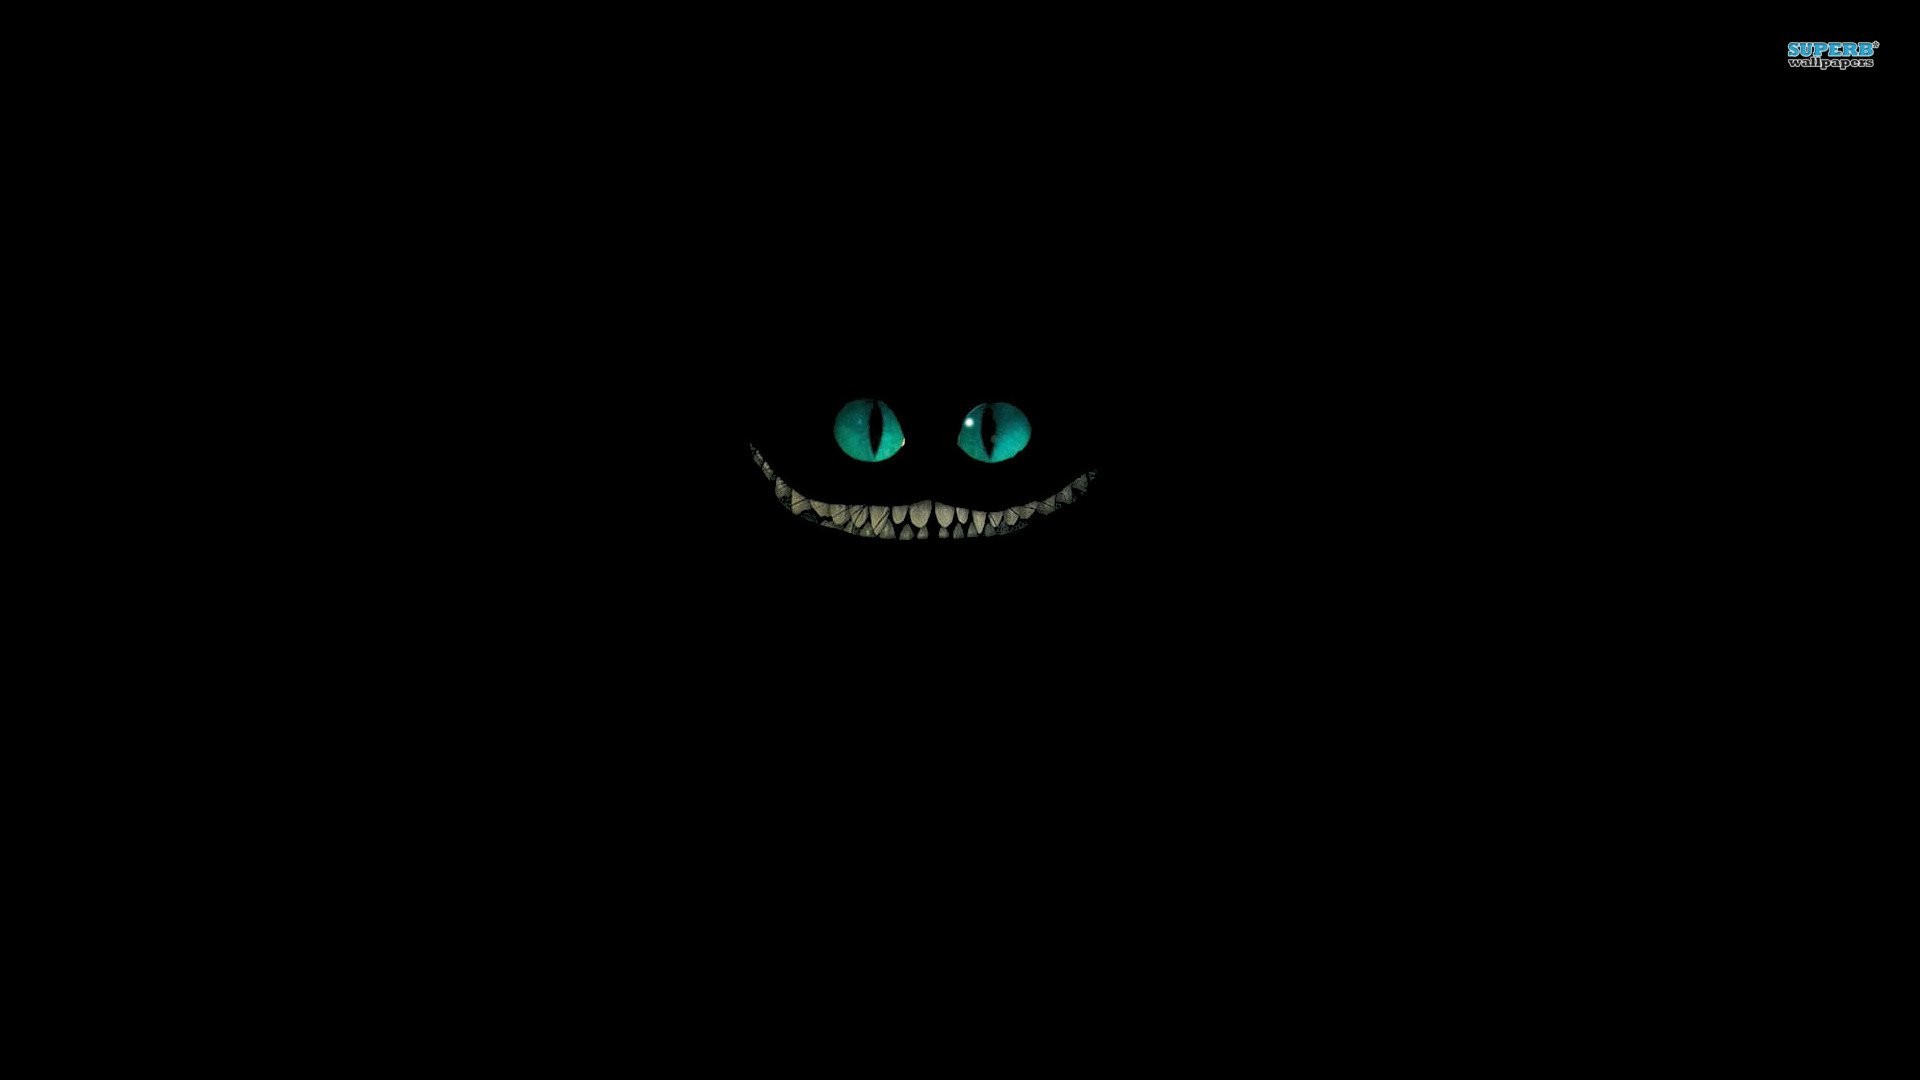  Cheshire  Cat  wallpaper    Download free cool full HD 